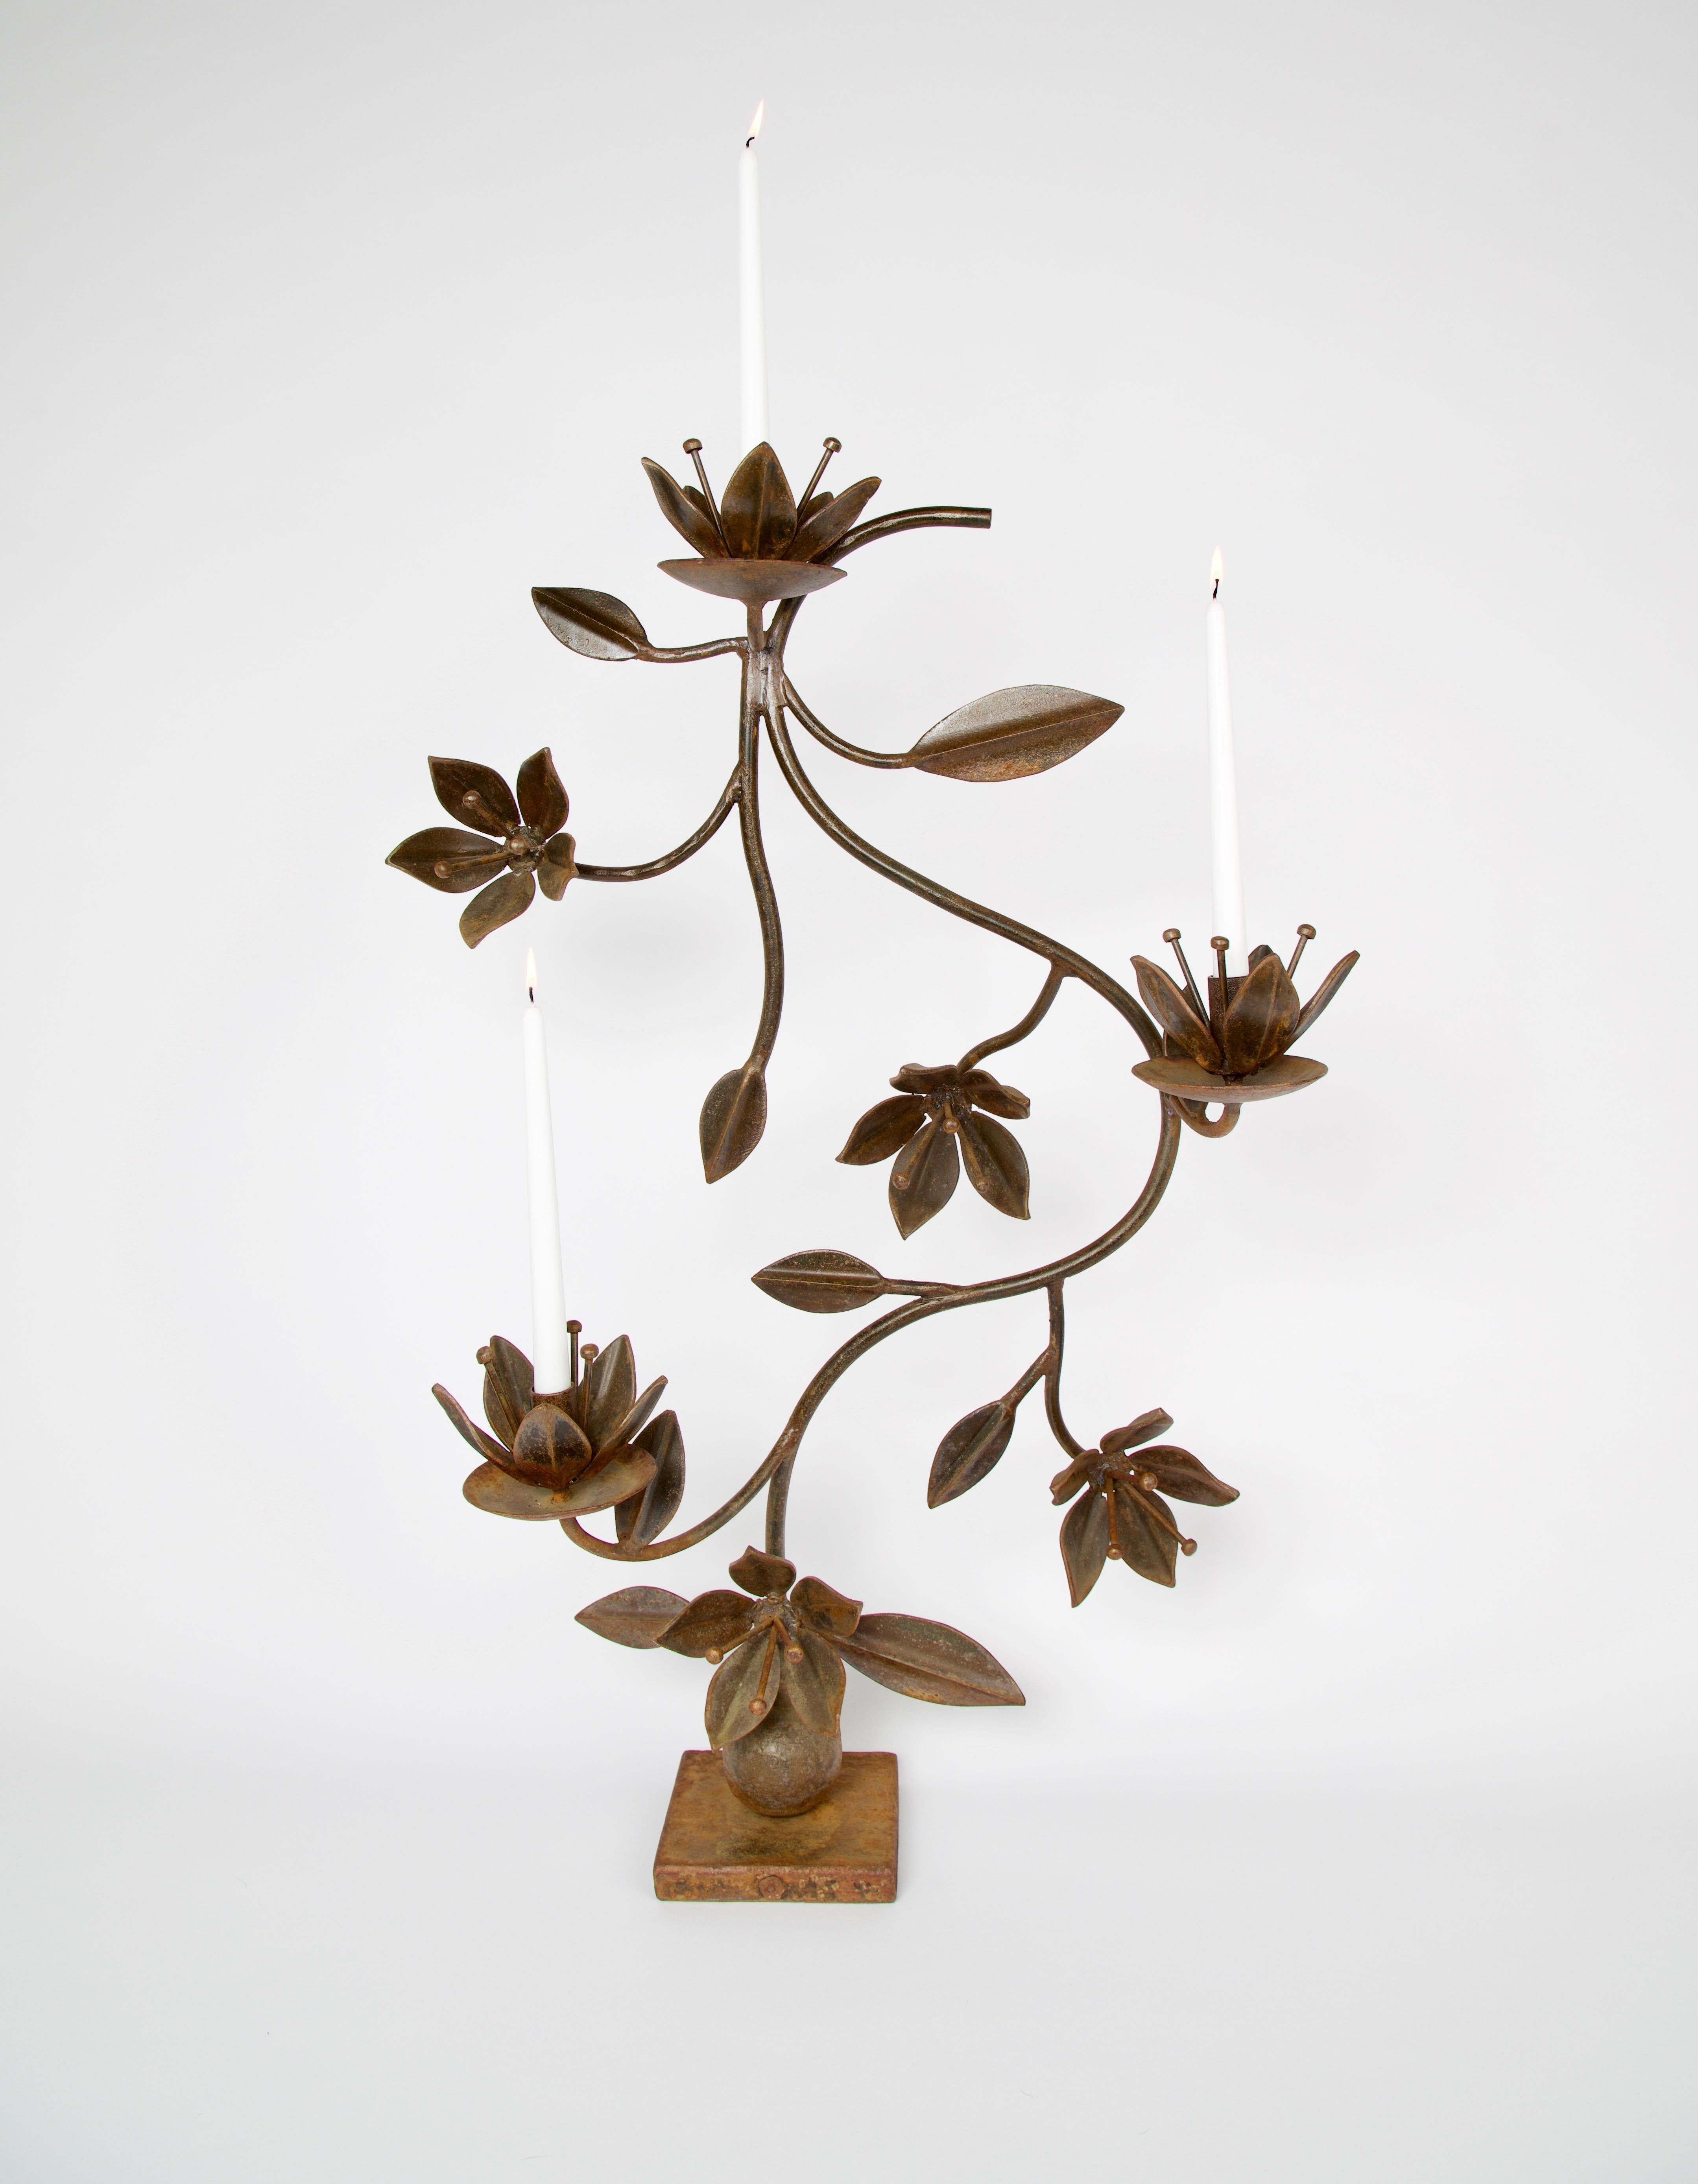 A earlier retired Iron floral candelabra by Jan Barboglio titled 